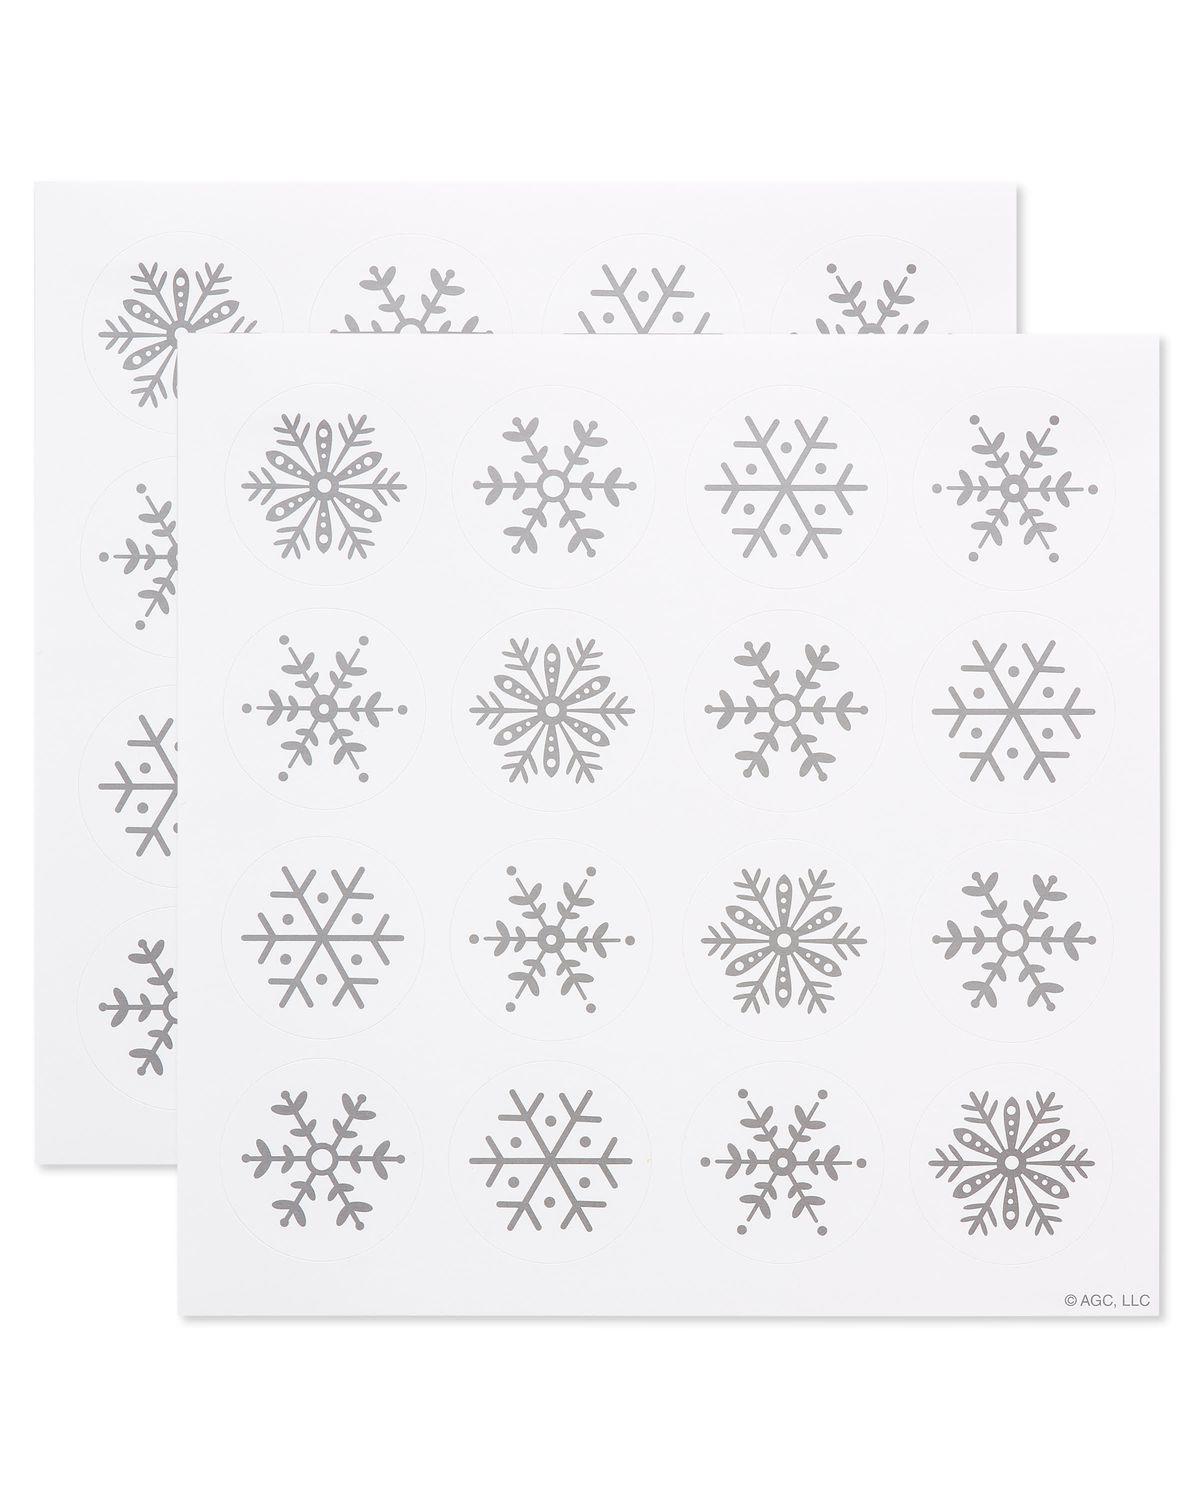 Snowflake Sticker Sheets, 32-Count | American Greetings